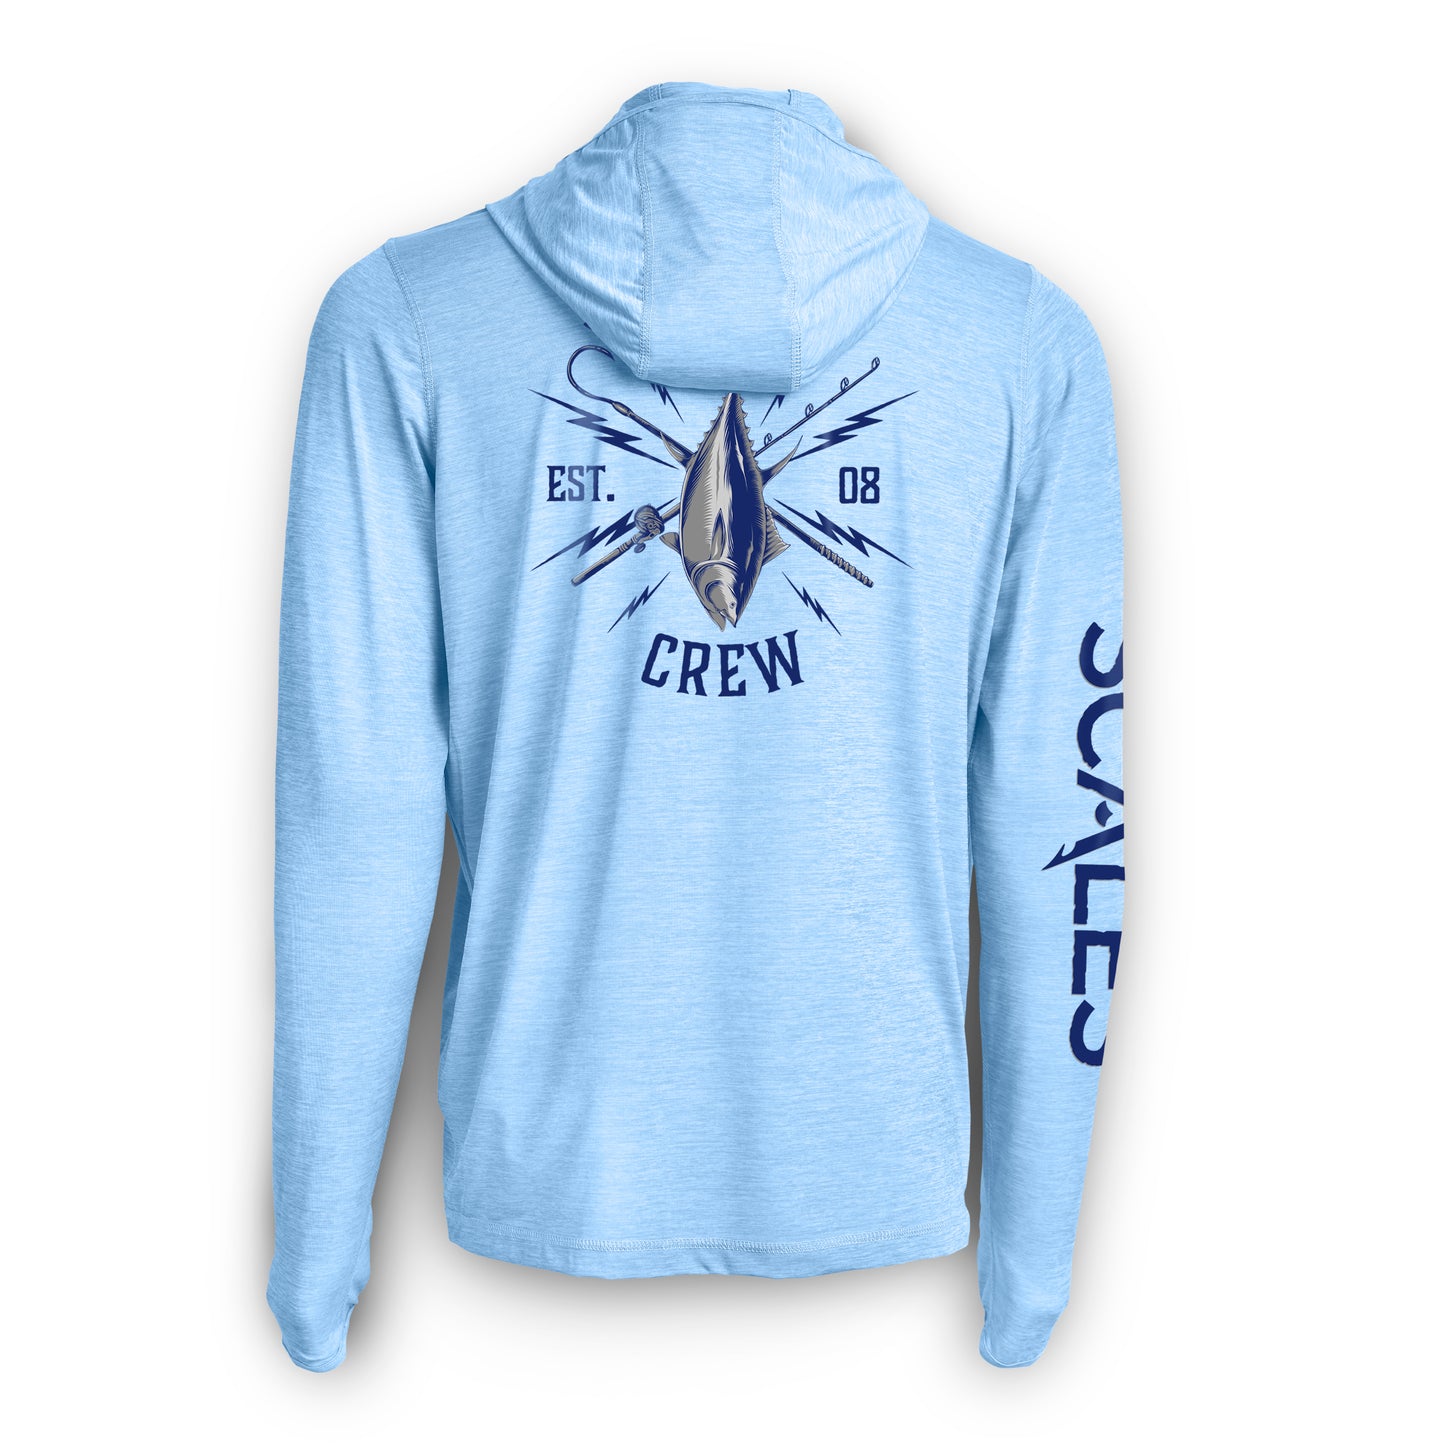 SCALES Blue Gold Active Performance Hooded Long Sleeve